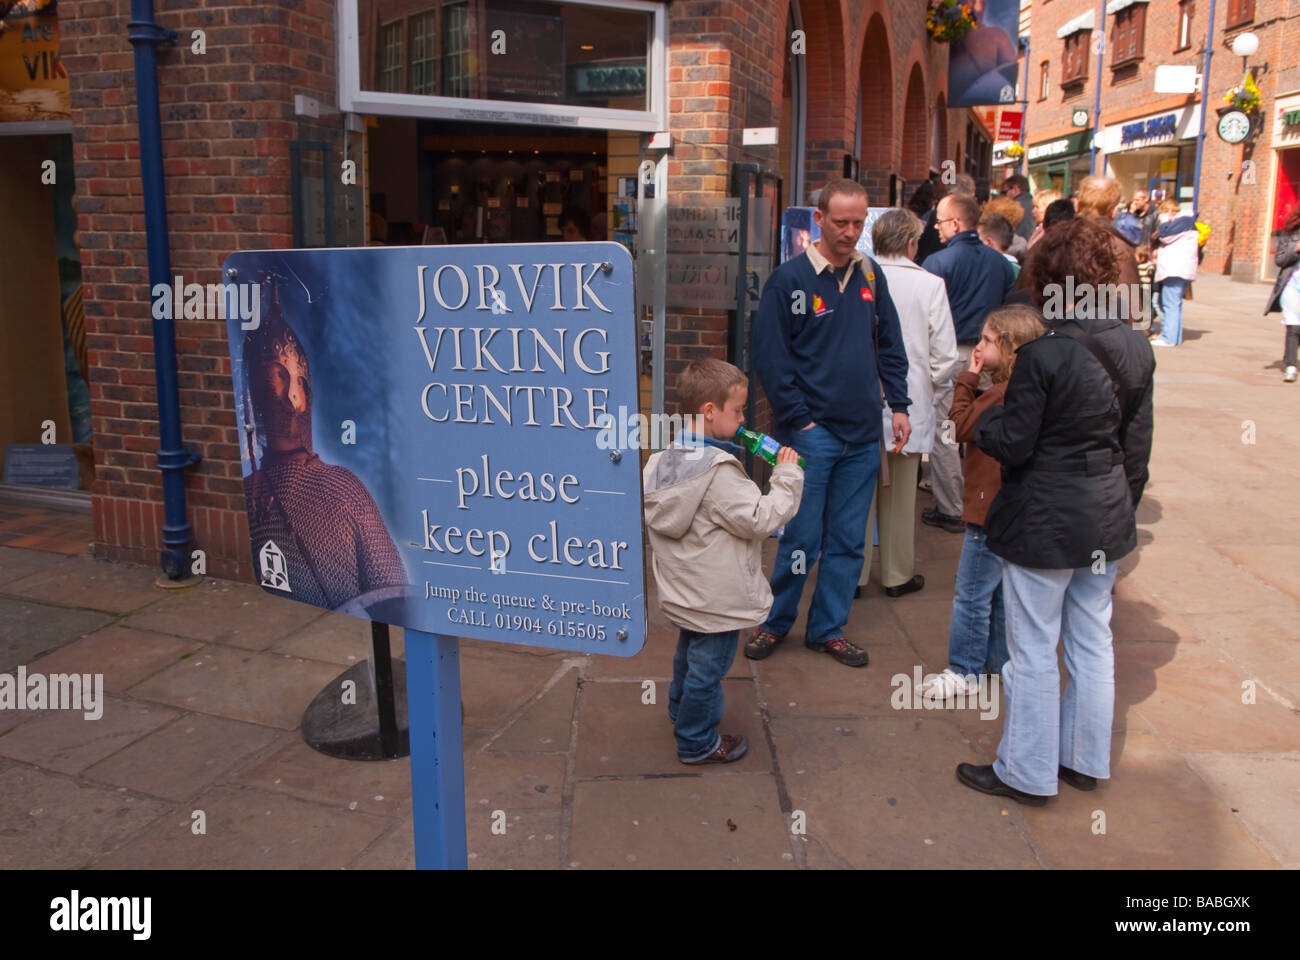 People queing up in a que to visit the Jorvik viking centre museum in York,Yorkshire,Uk Stock Photo